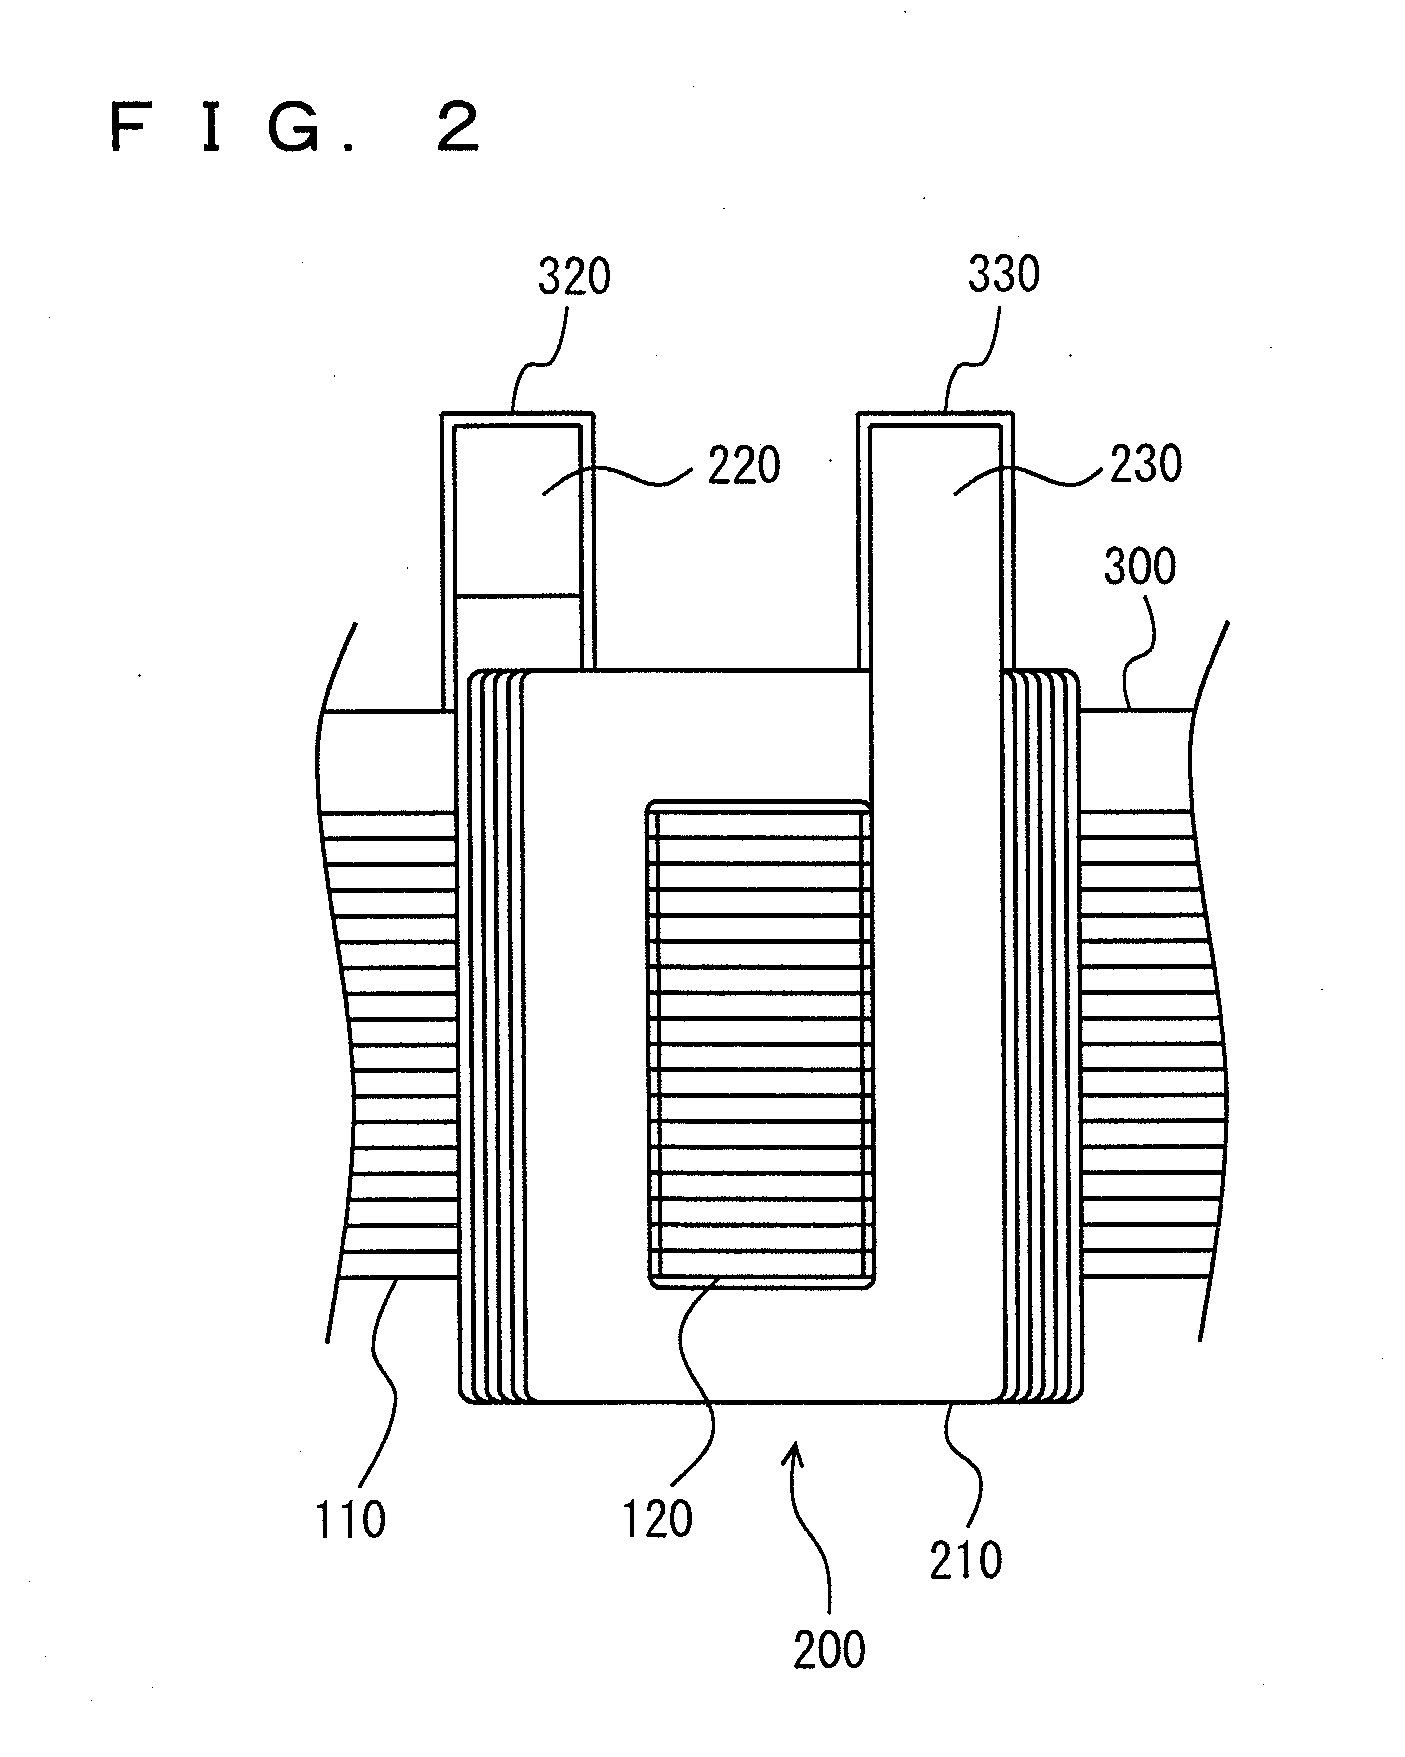 Connection line used for stator of electric motor, stator including that connection line, and method for bending the connection line